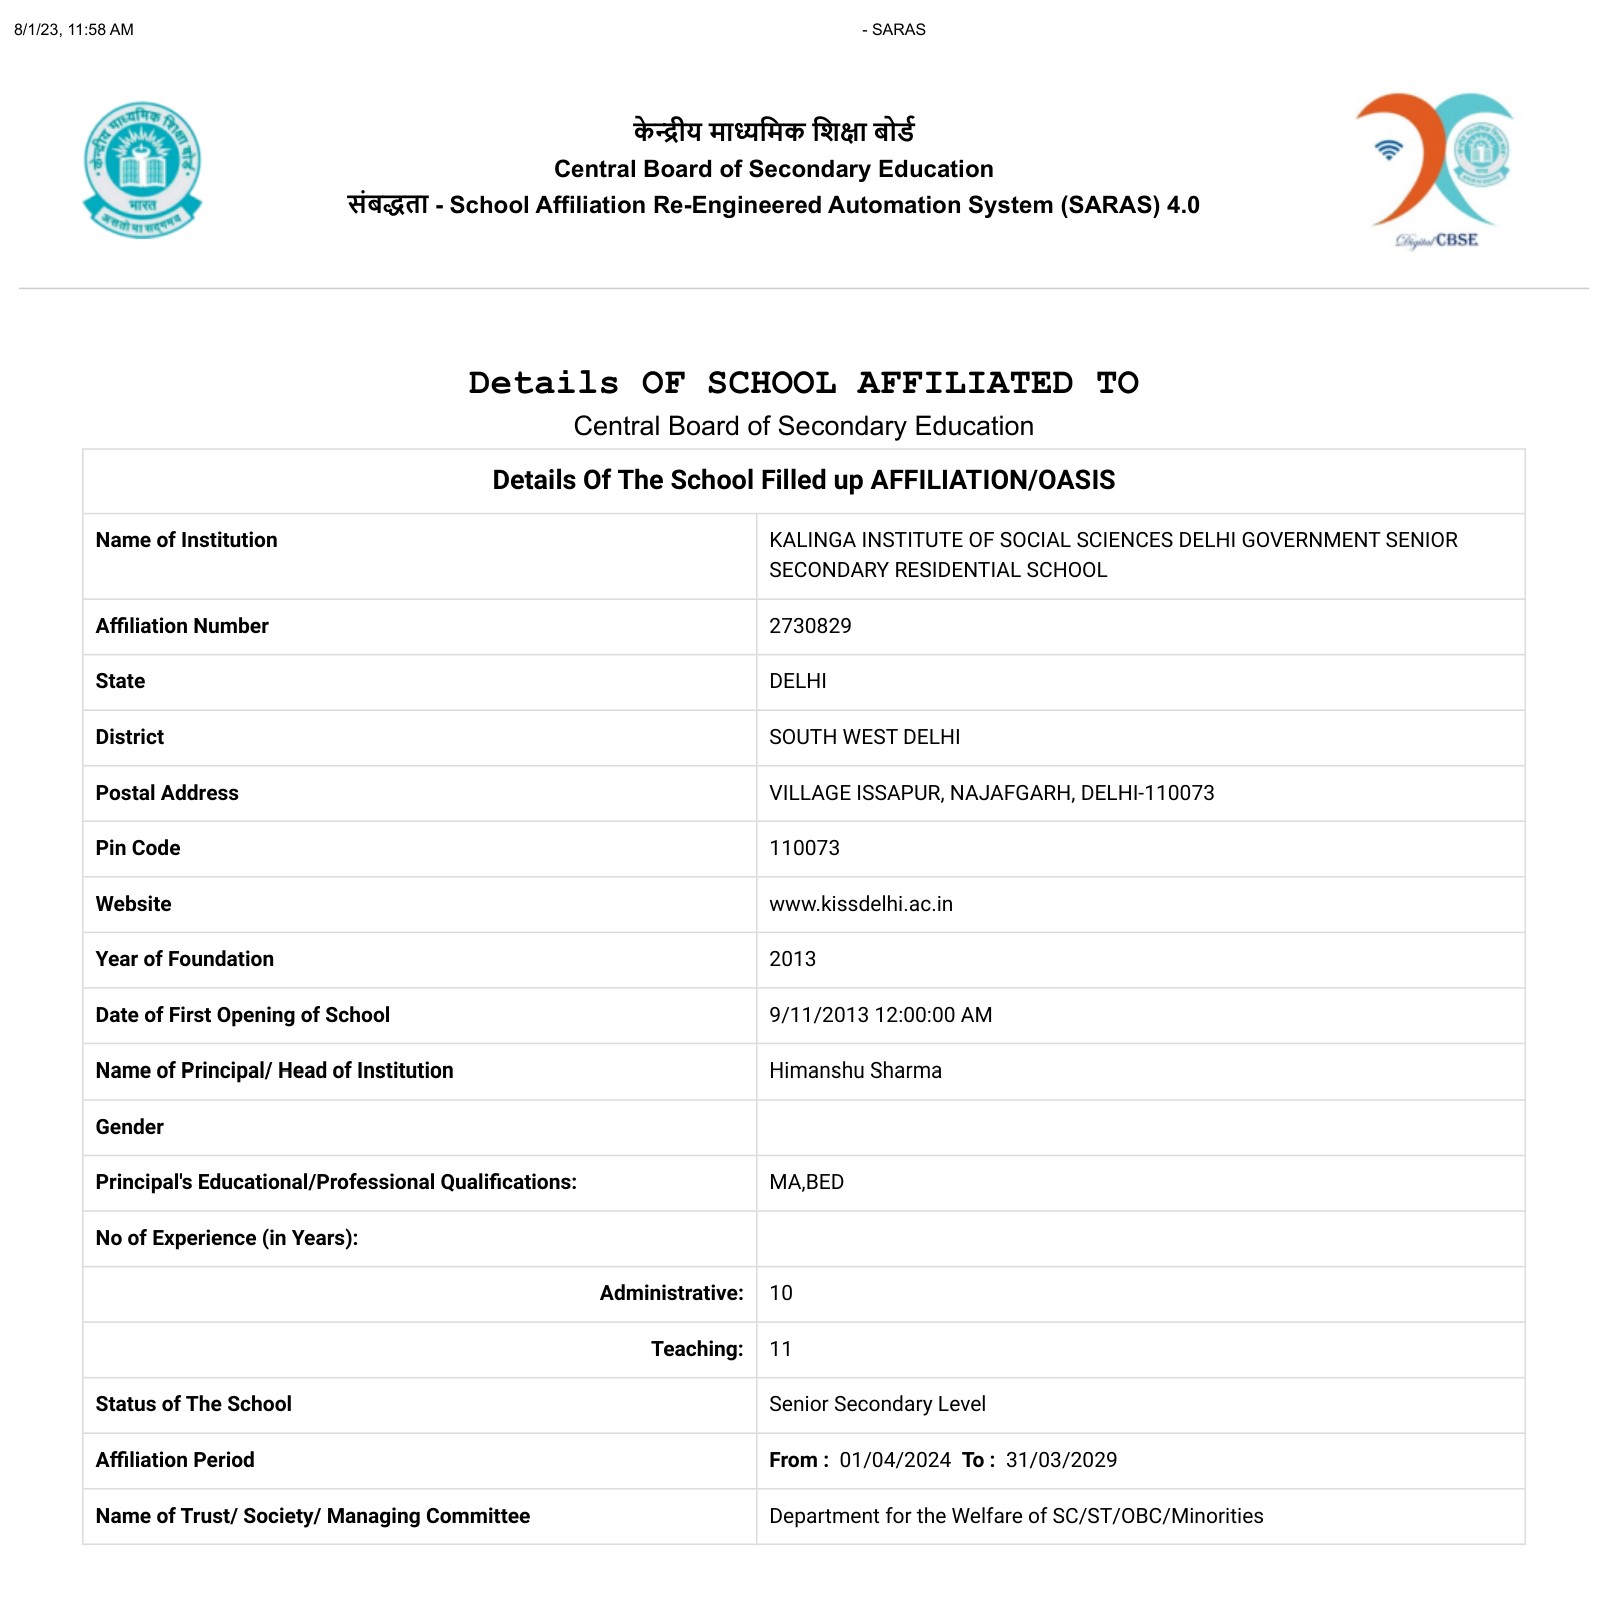 Details of the School Affiliated With CBSE KISSDGSSRS